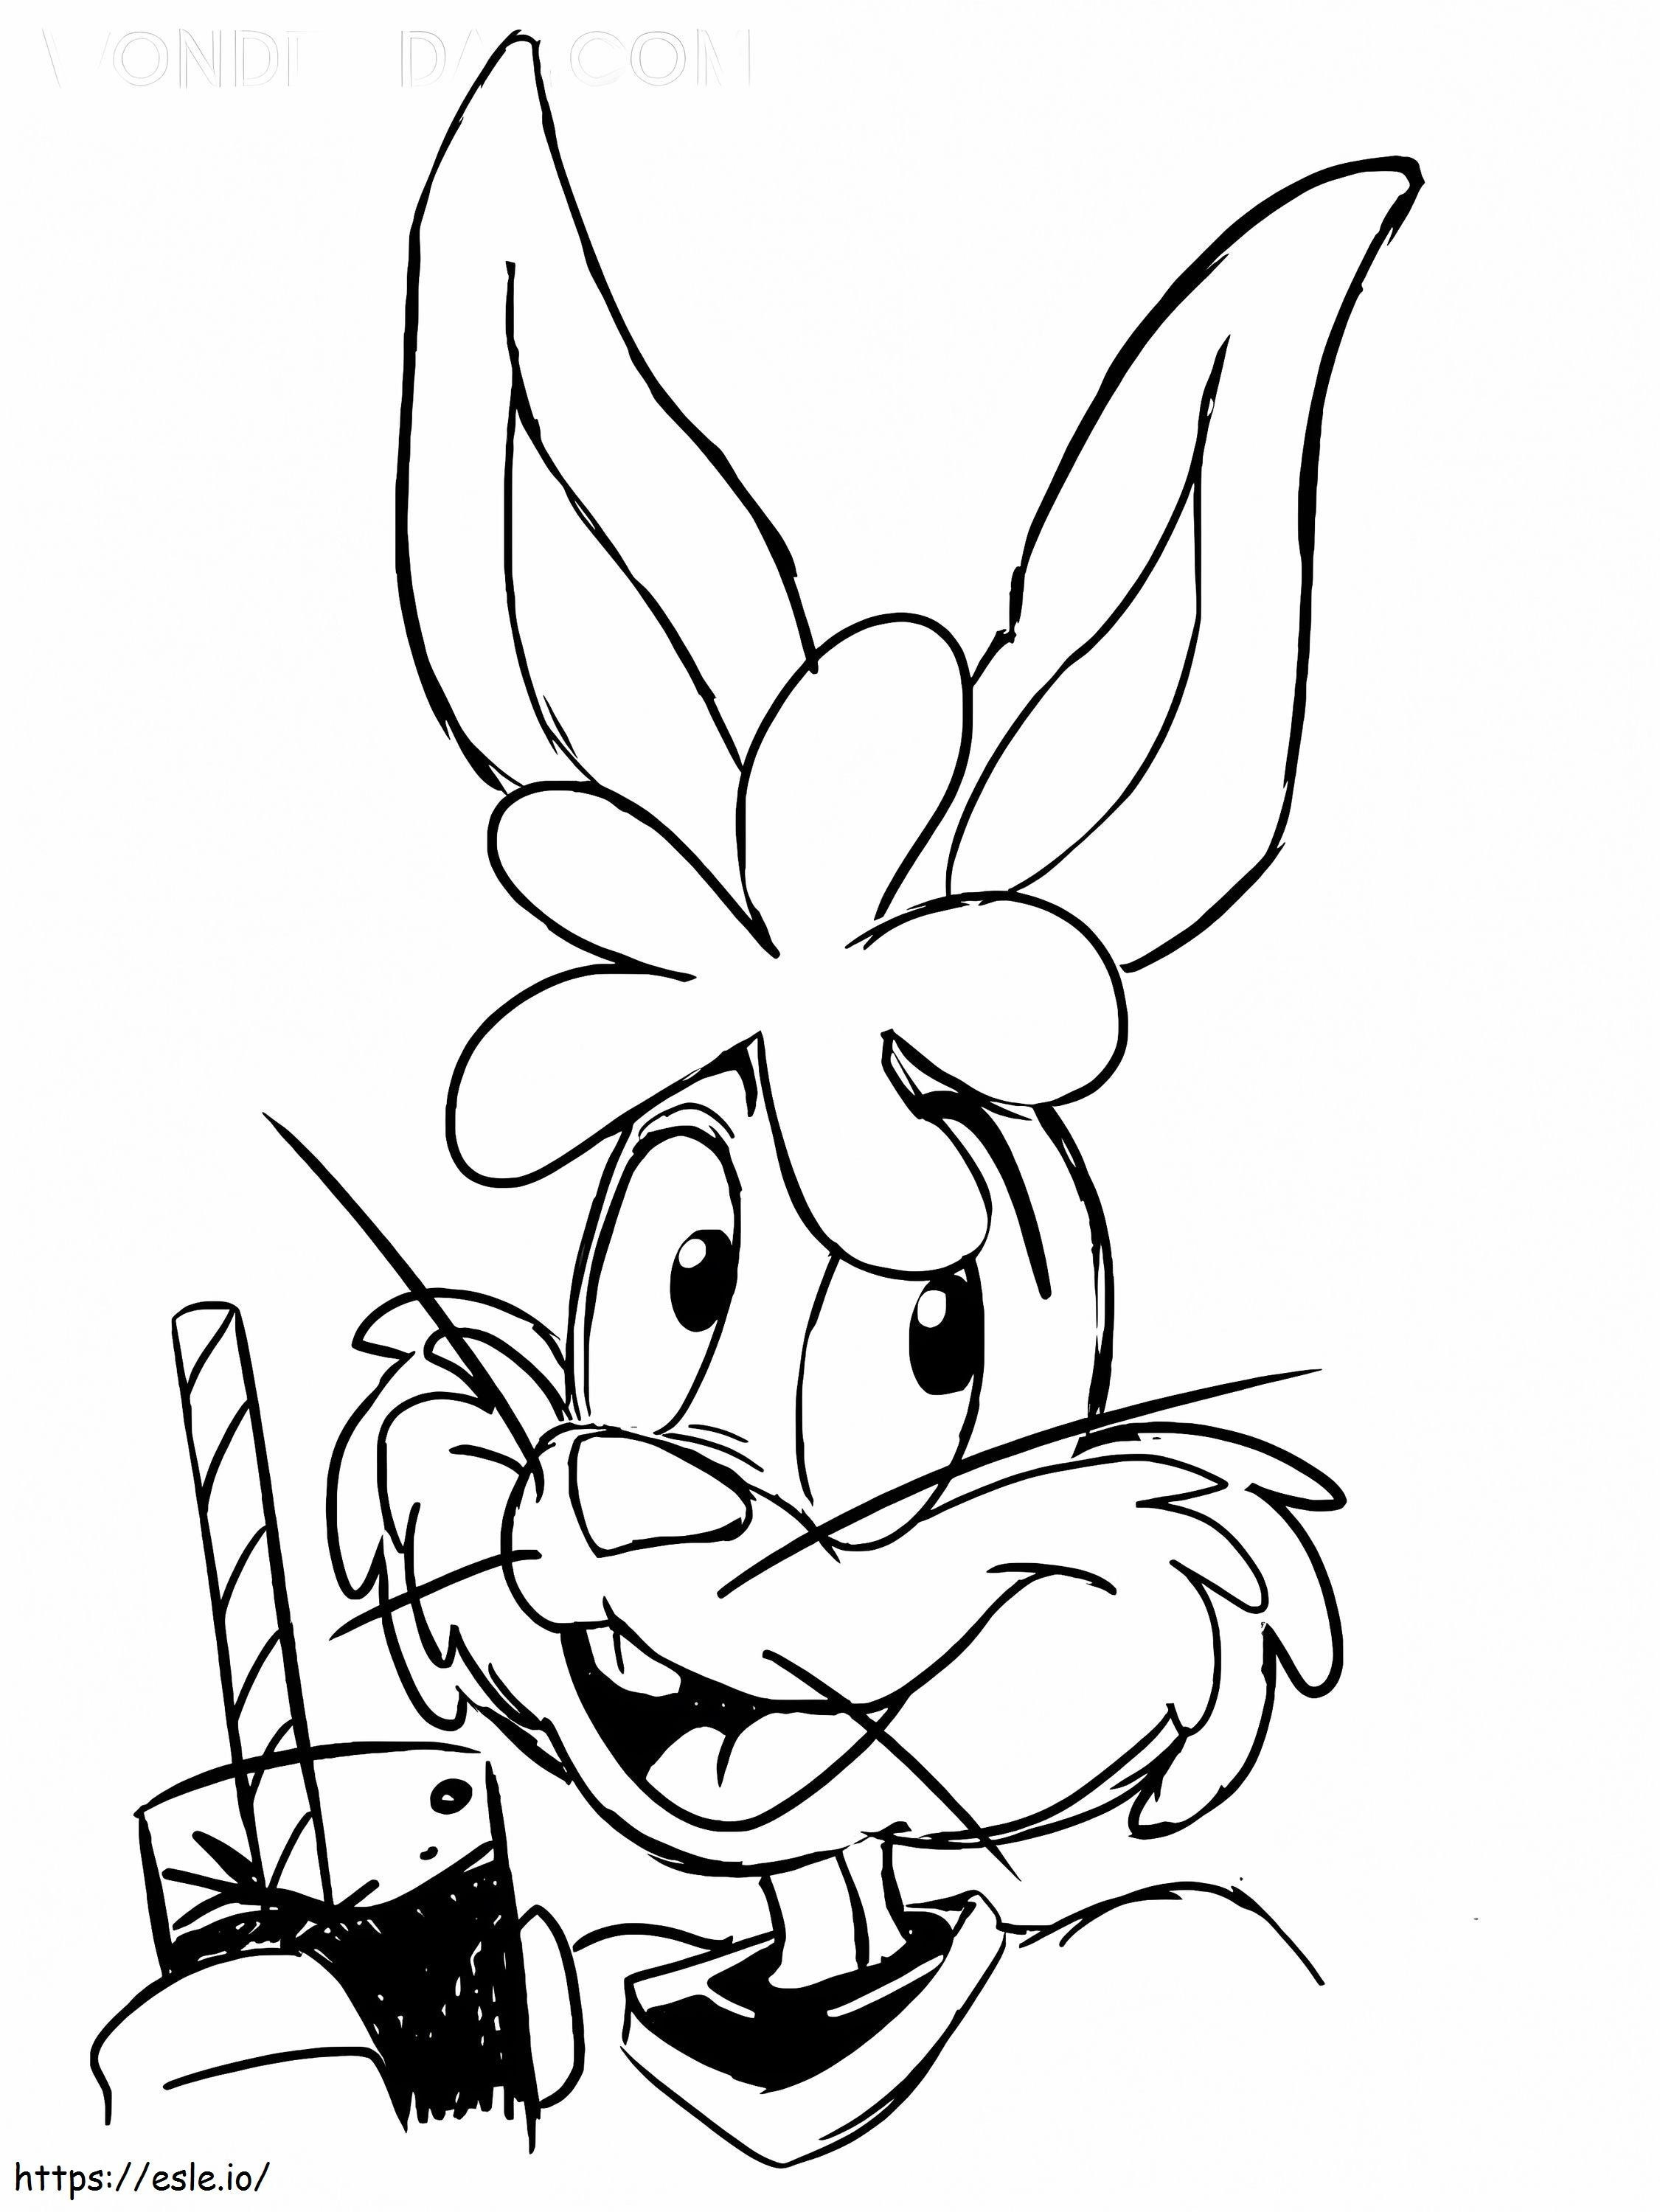 Nesquik Sketch coloring page